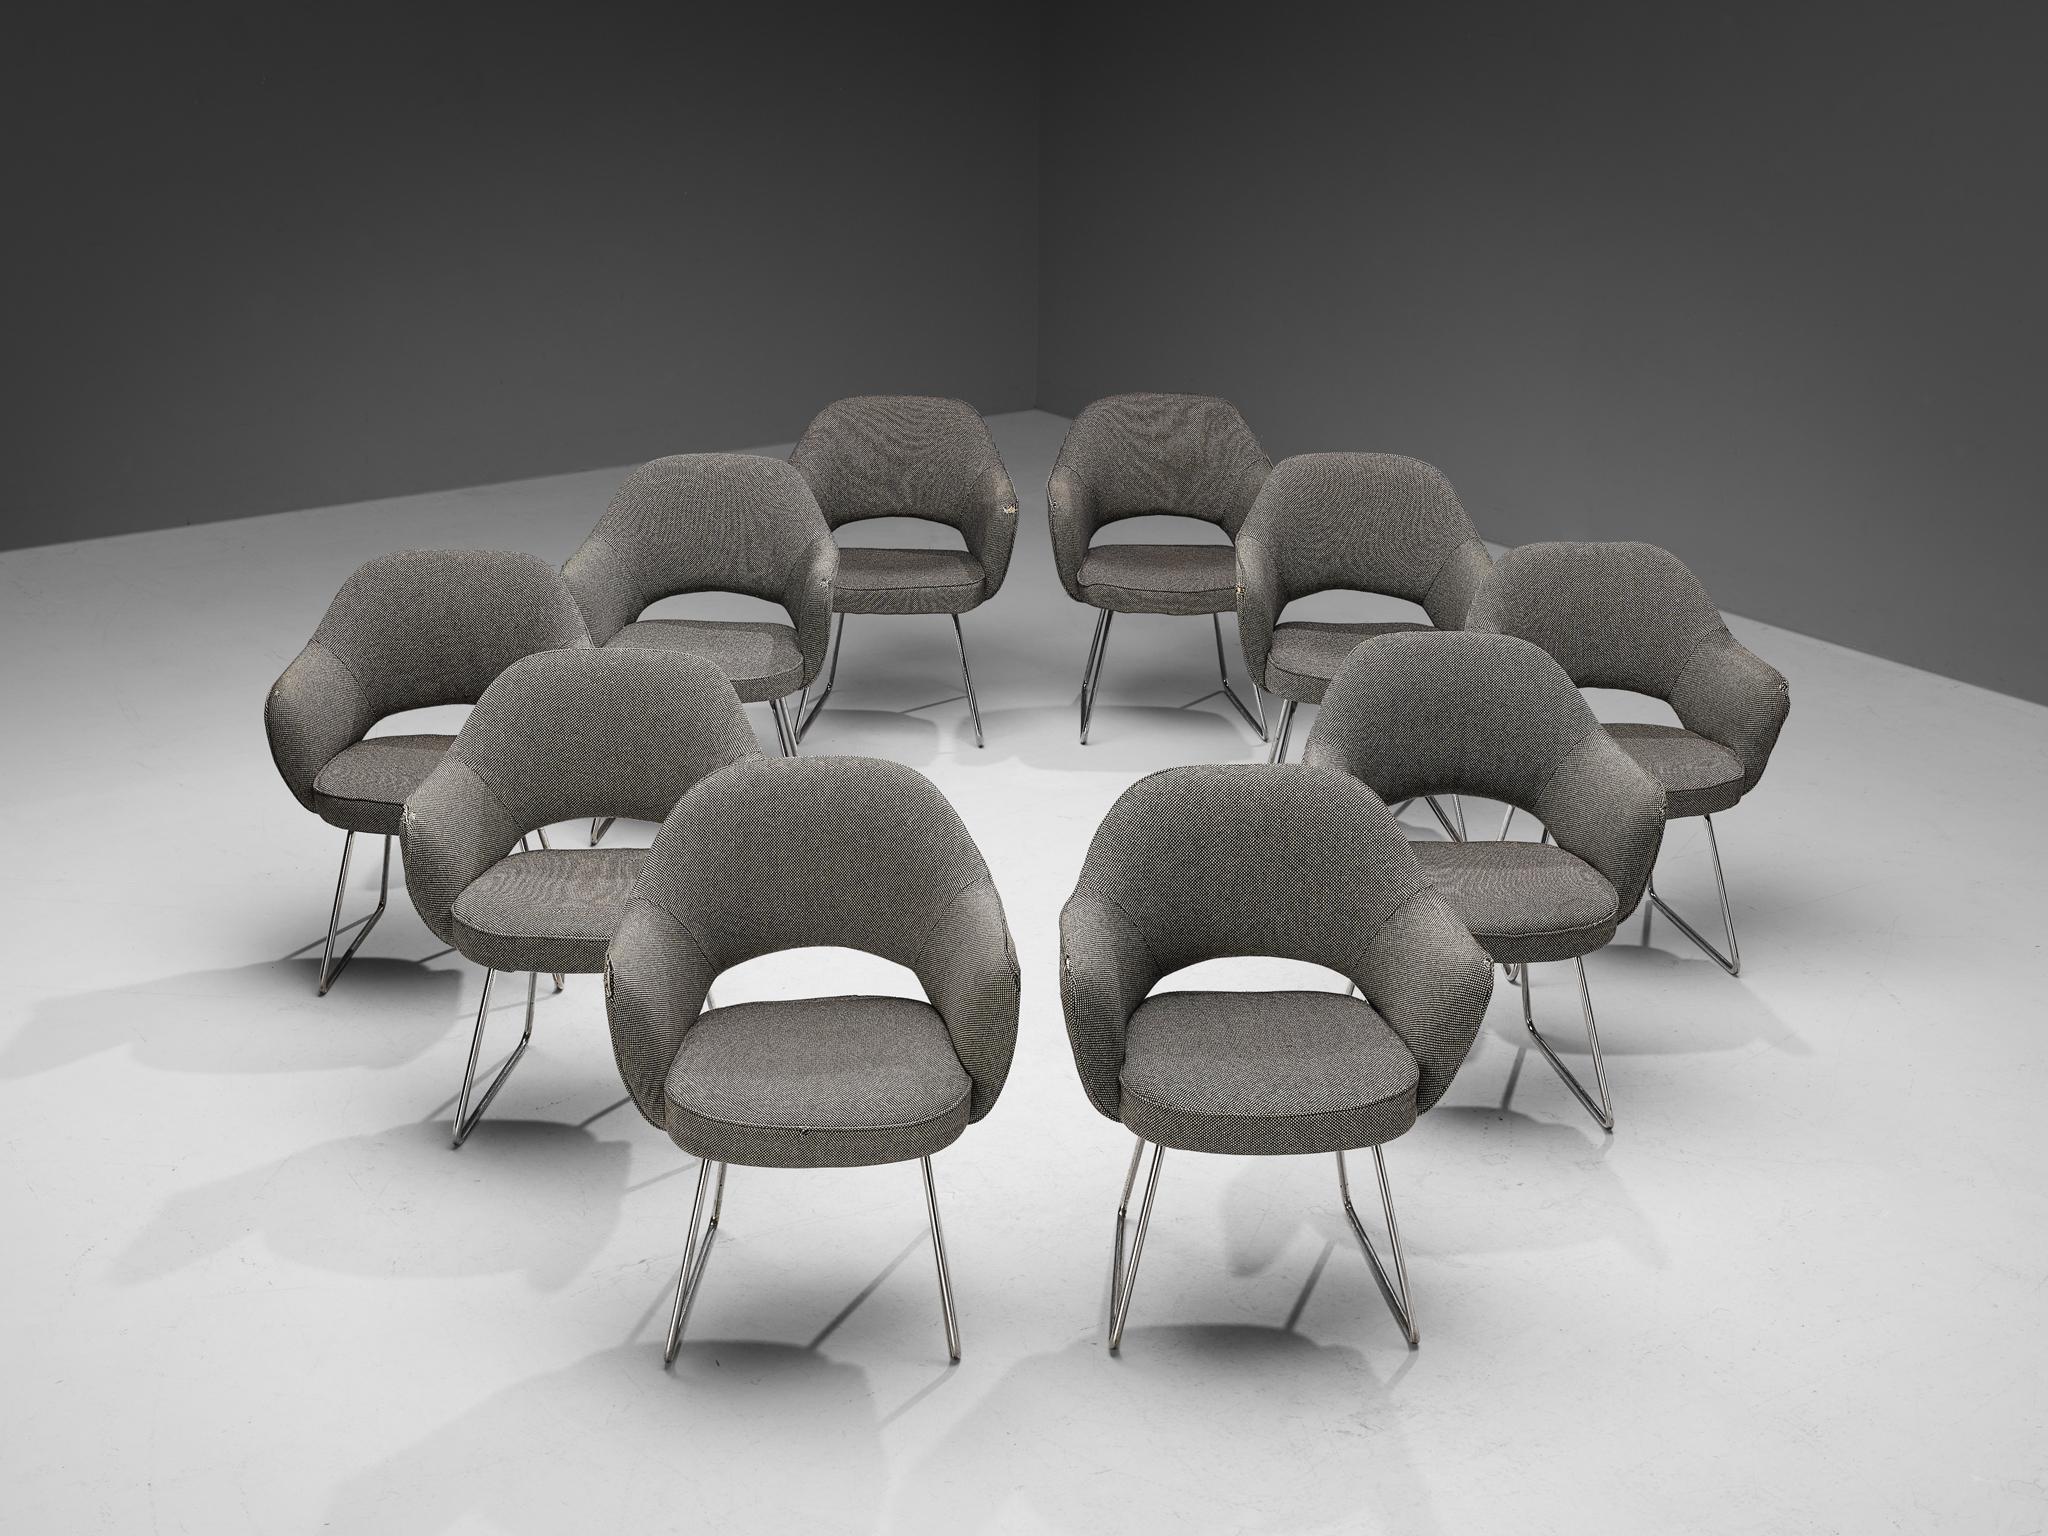 Eero Saarinen for Knoll International, set of ‘Conference’ armchairs, fabric, chromed metal, France, Paris, designed in 1957

This large set of armchairs was commissioned by the UNESCO Headquarters located in Paris. This iconic building was